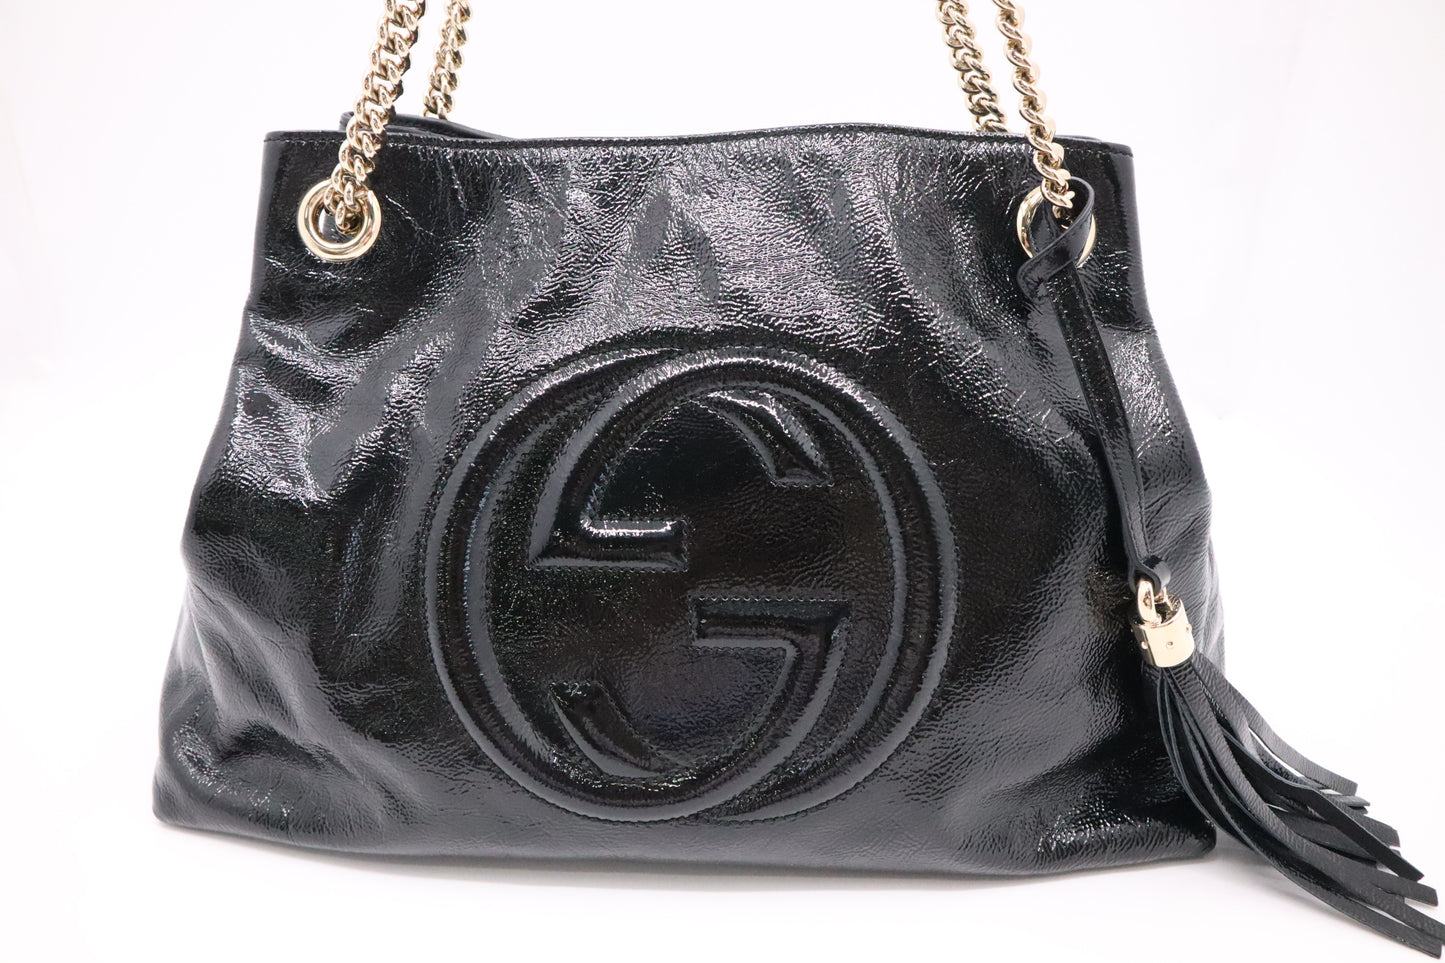 Gucci Soho Chain Shoulder Bag in Black Patent Leather